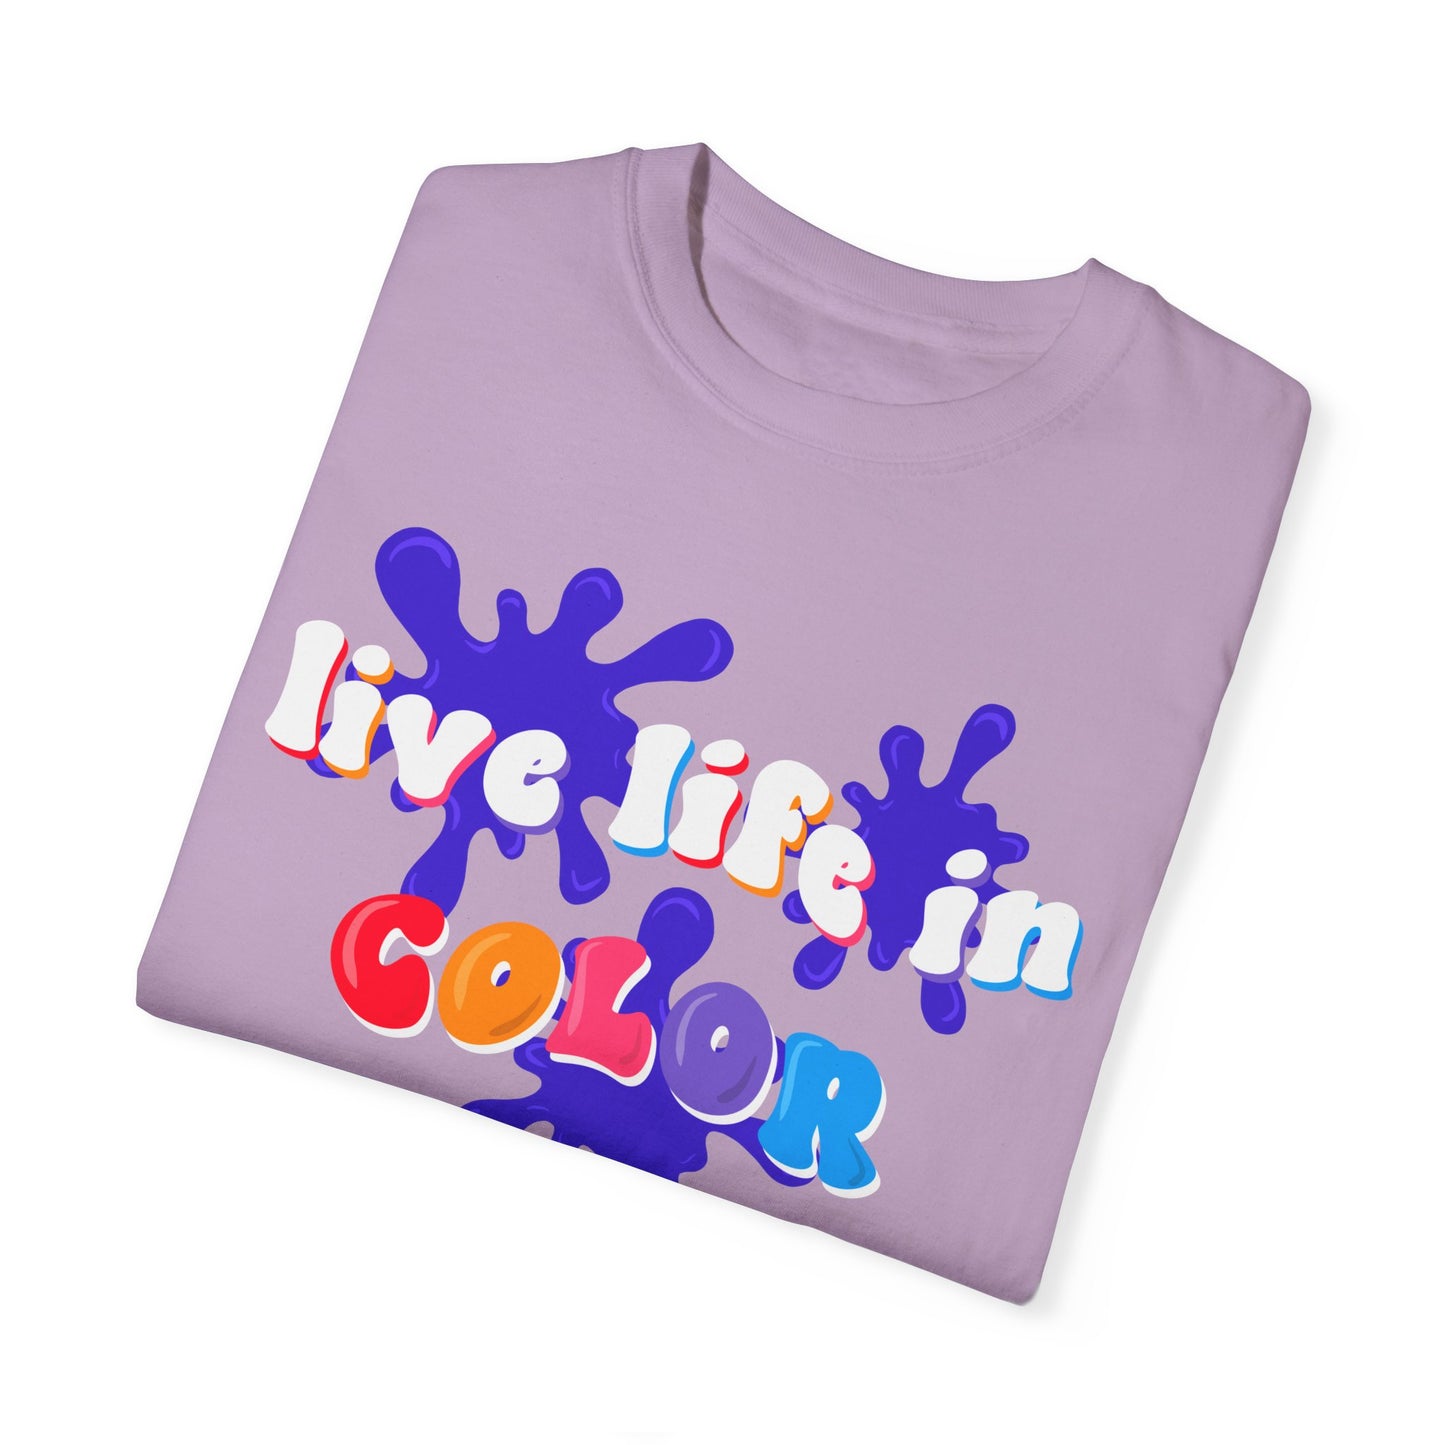 Adult Live Life in Color Comfort Colors